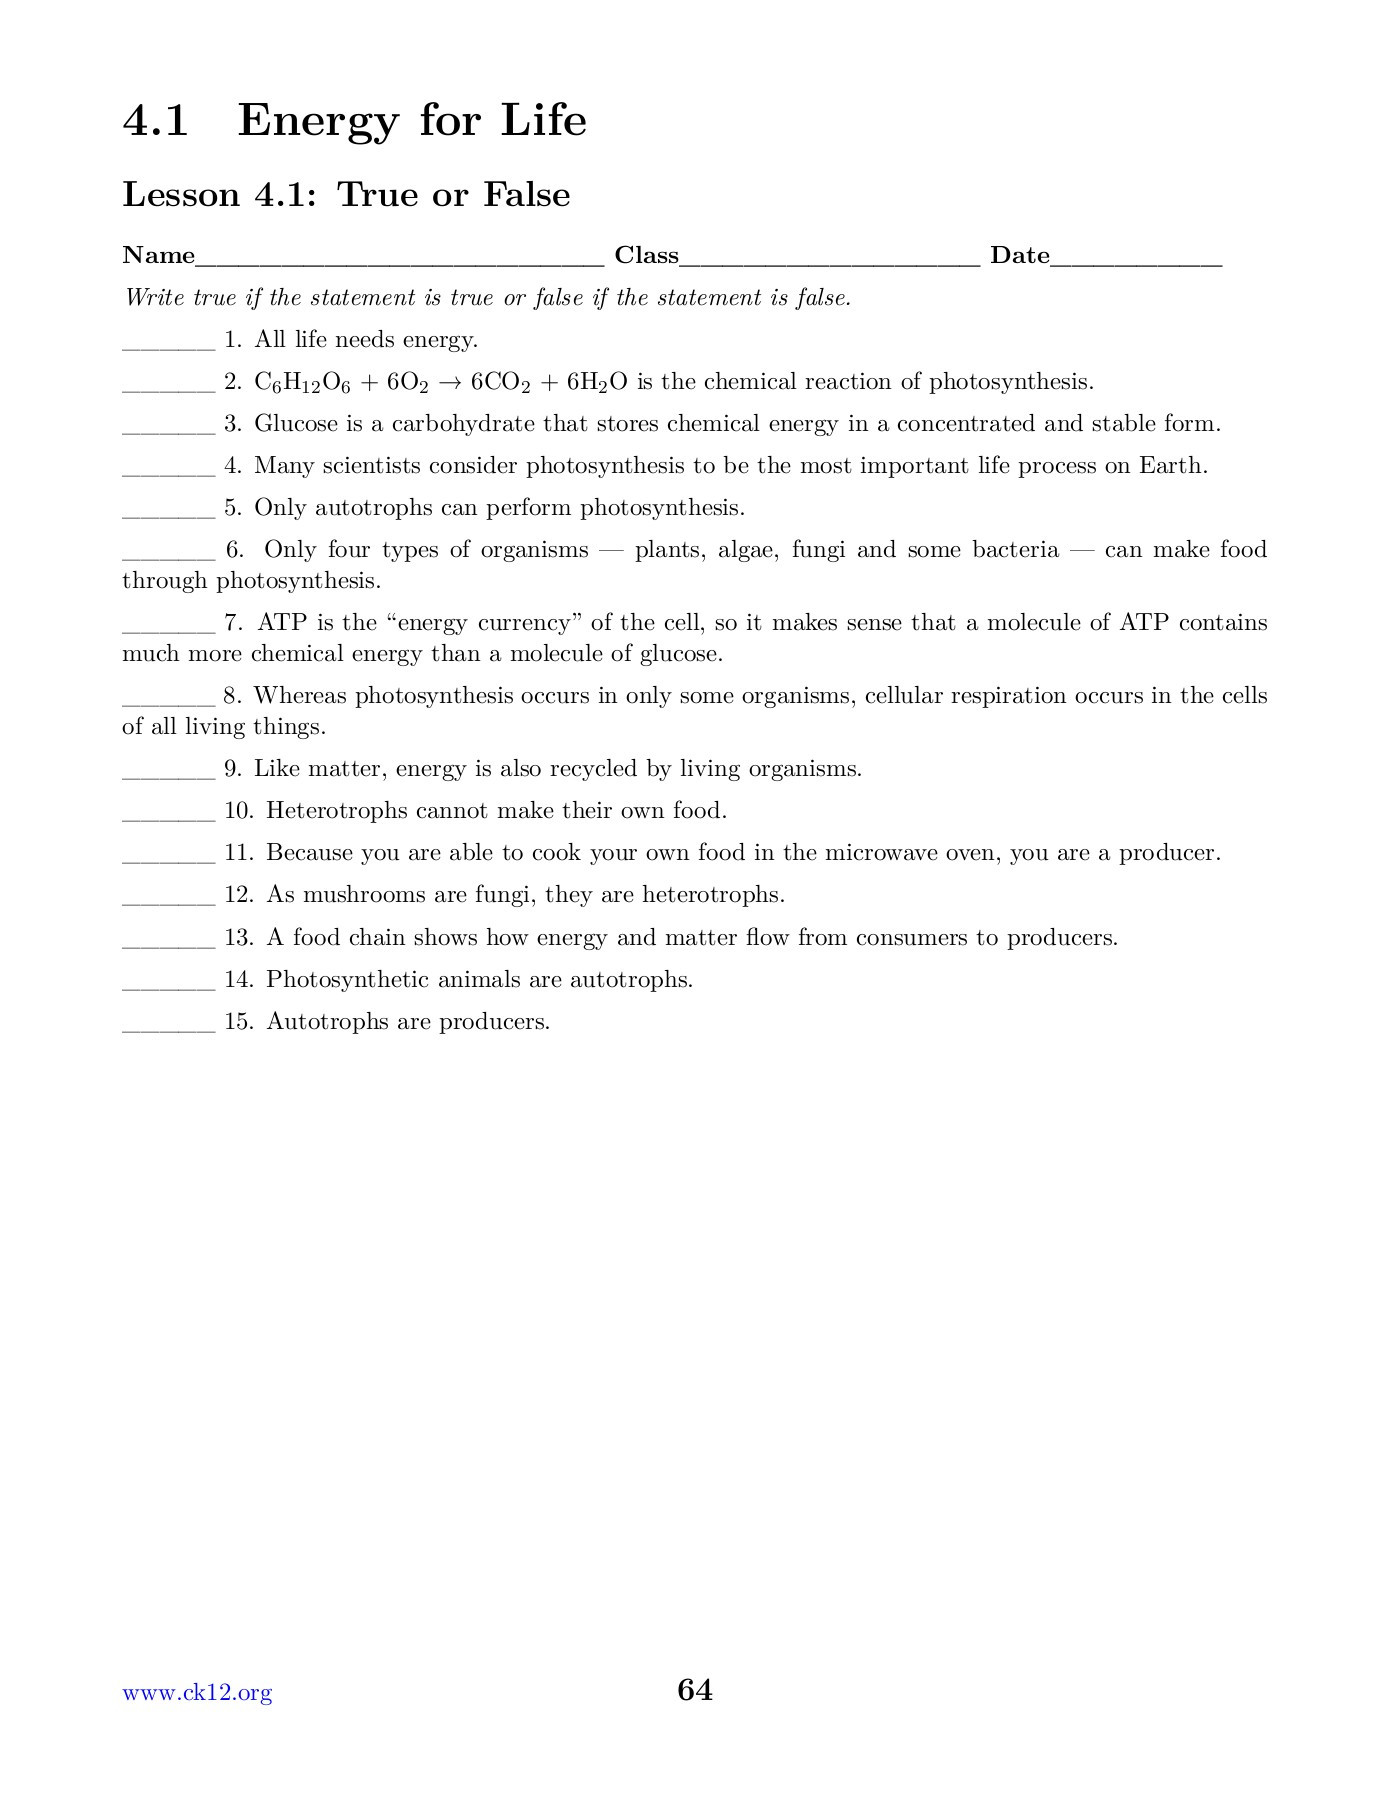 Photosynthesis and Respiration Worksheet Chapter 4 Synthesis and Cellular Respiration Worksheets